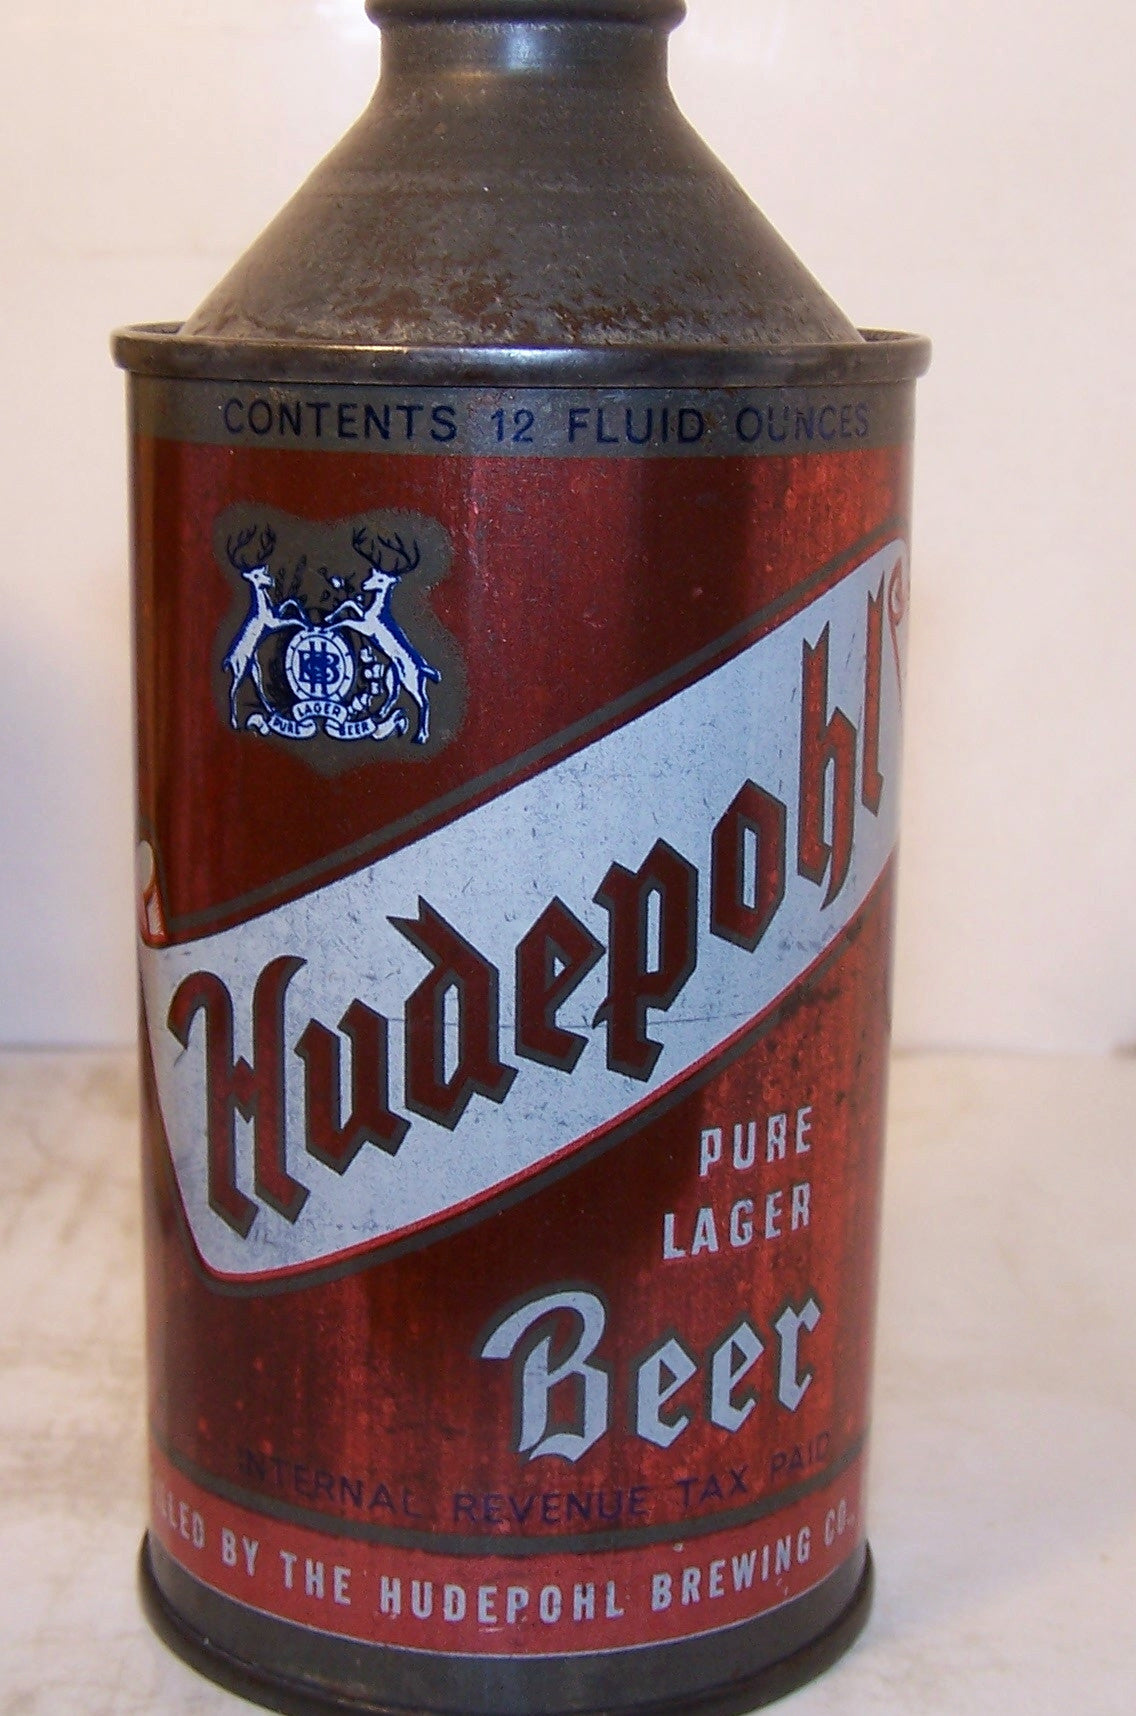 Hudepohl Pure Lager Beer, USBC 169-28, Grade 1- Sold 12/13/14